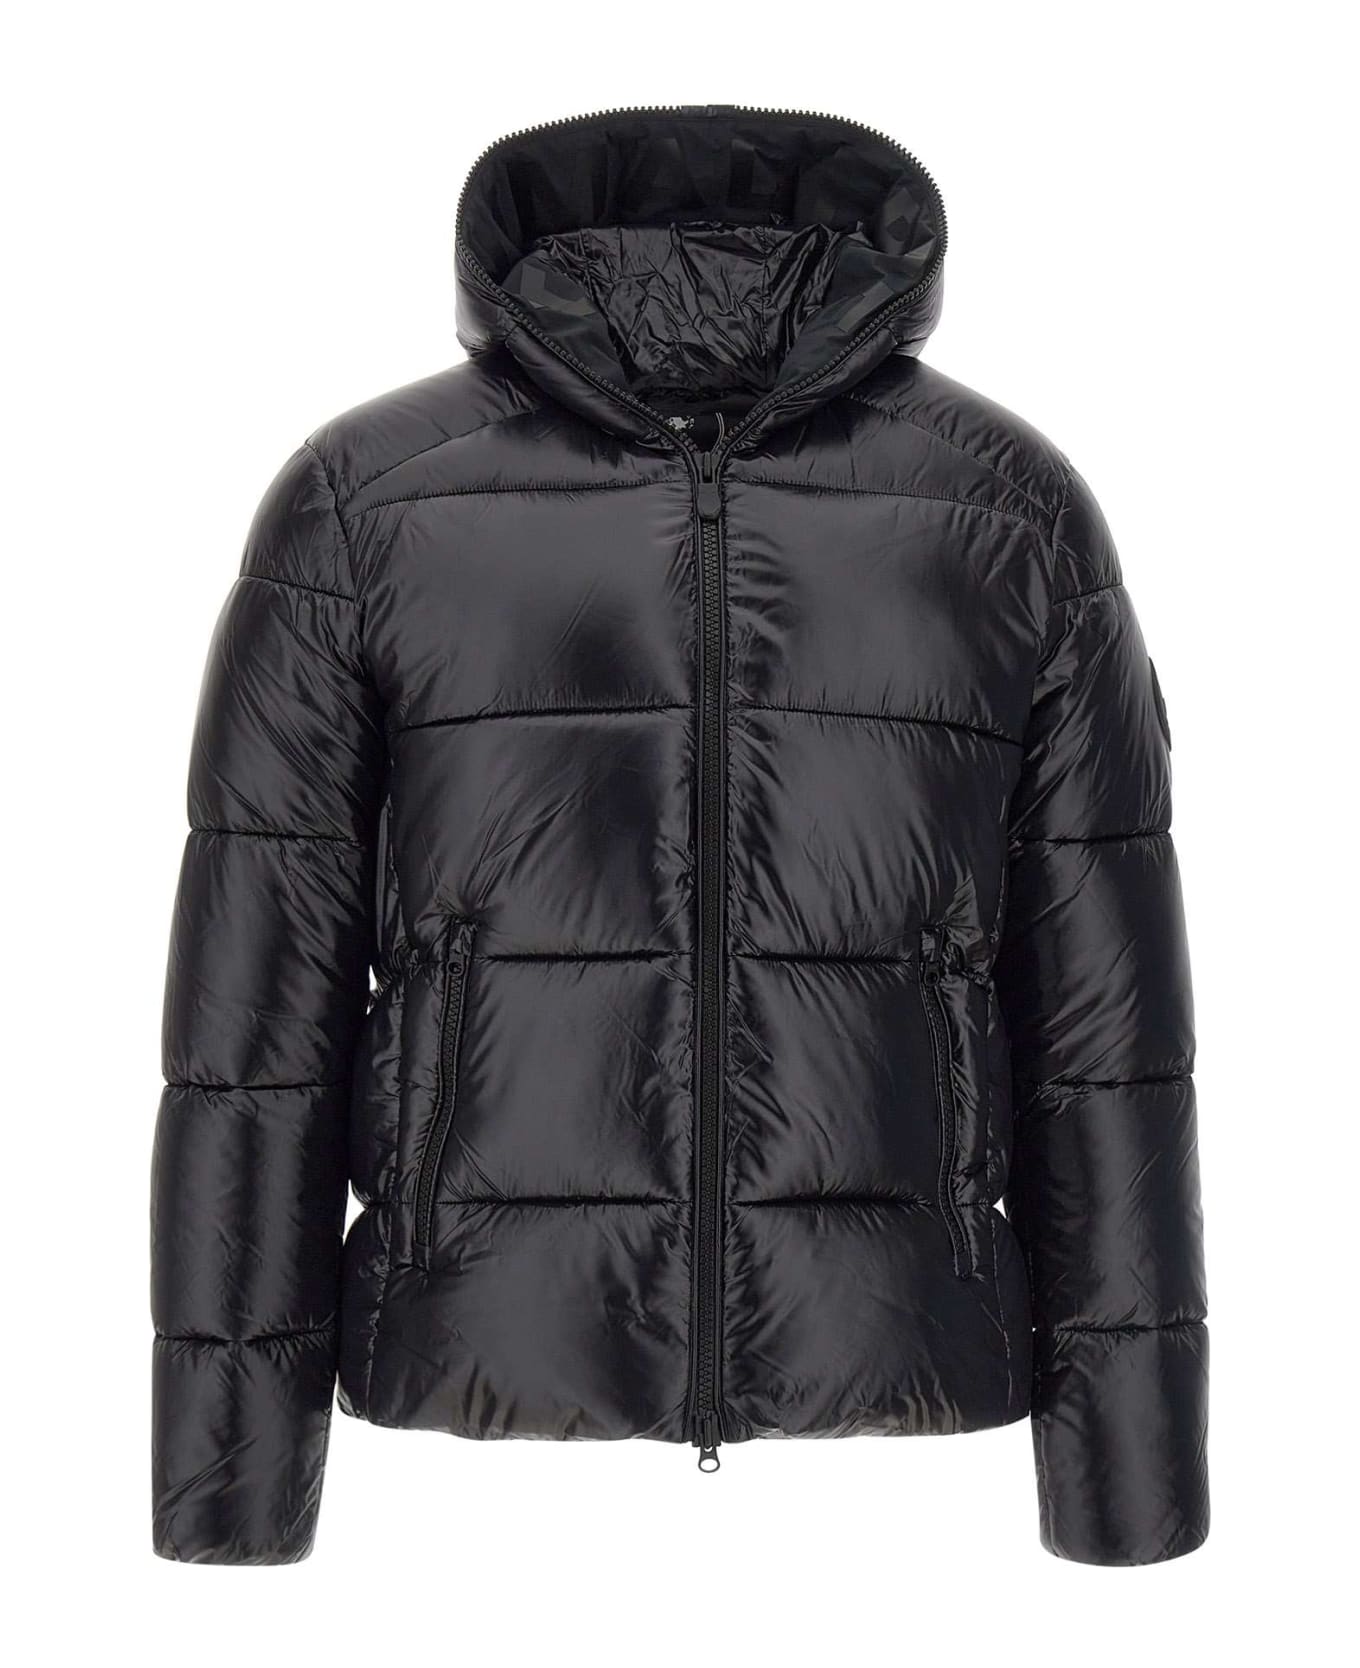 Save the Duck "luck17 Edgard" Down Jacket - BLACK